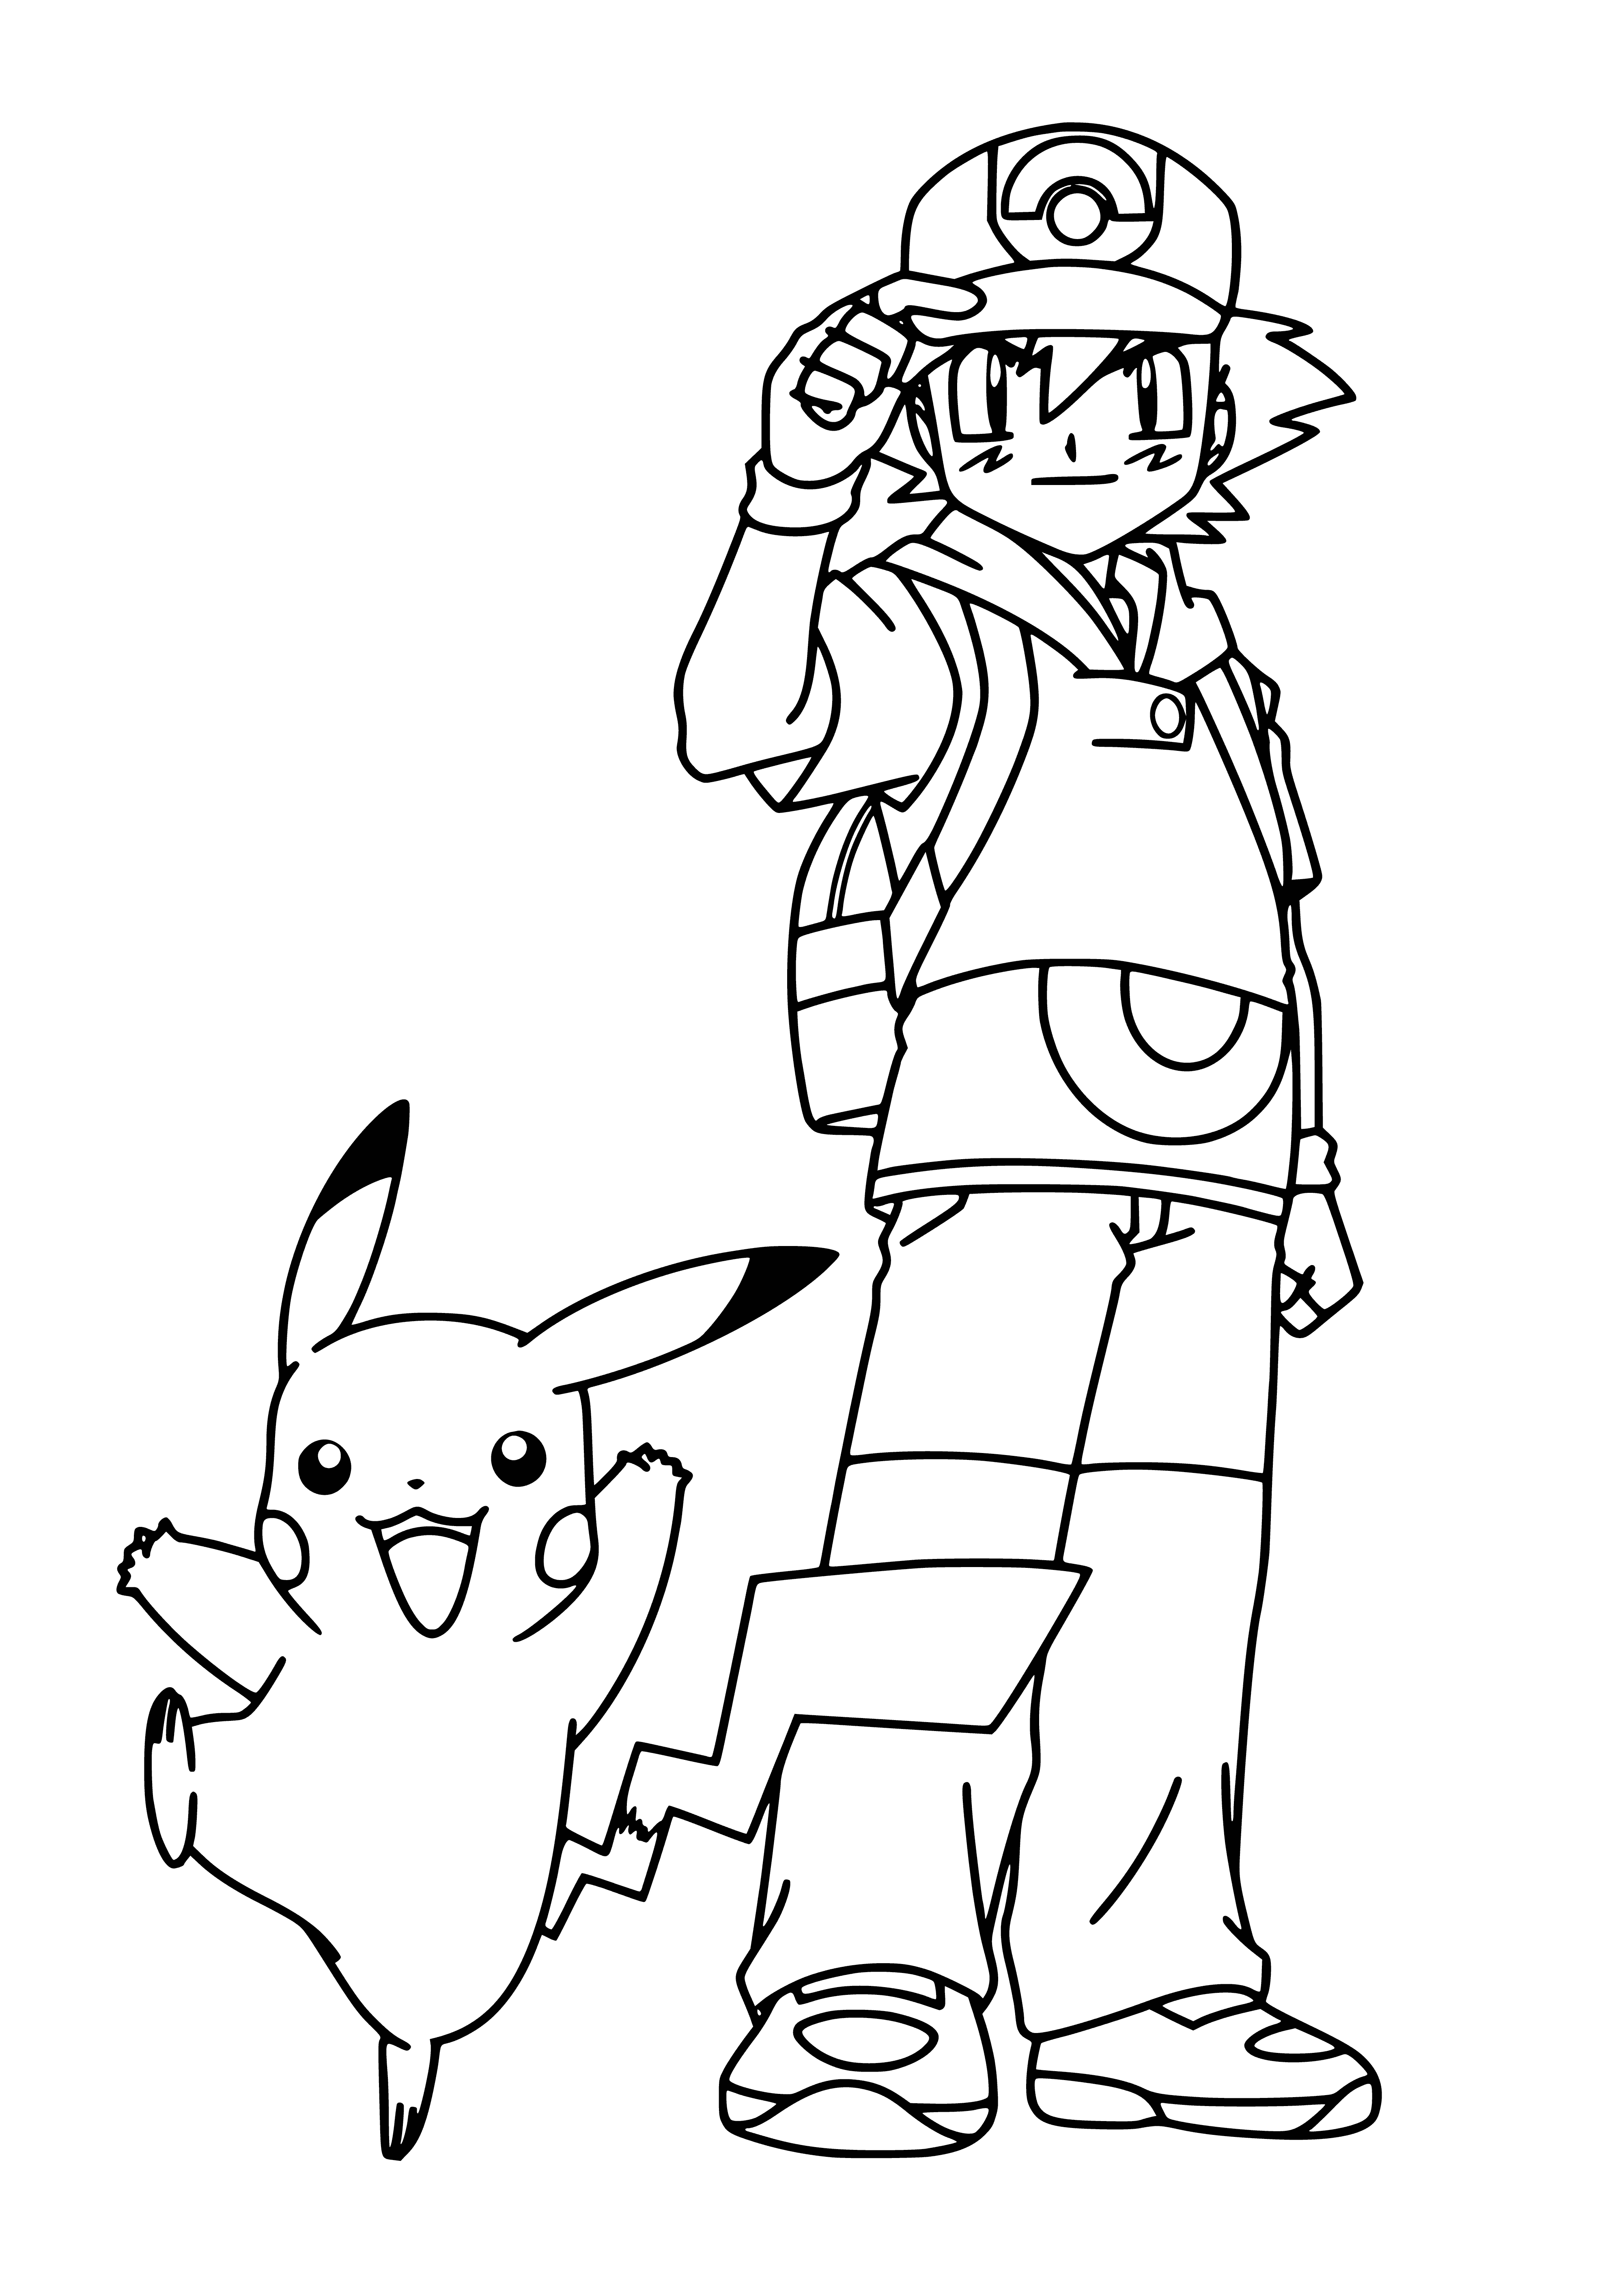 Pikachu and Ash coloring page